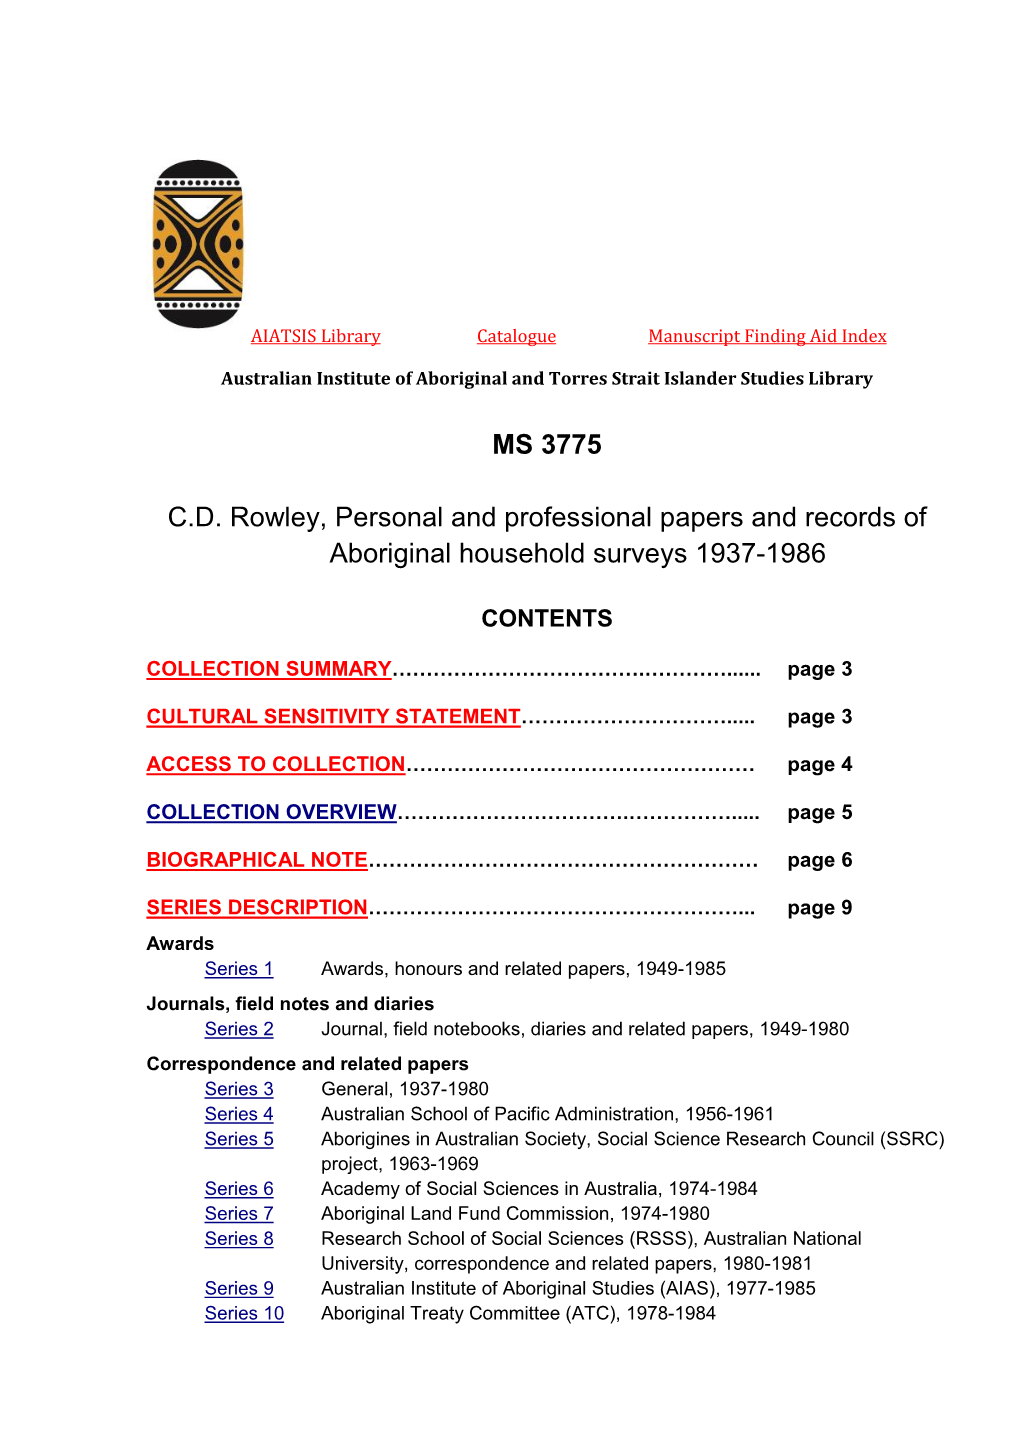 MS 3775 C.D. Rowley, Personal and Professional Papers and Records Of